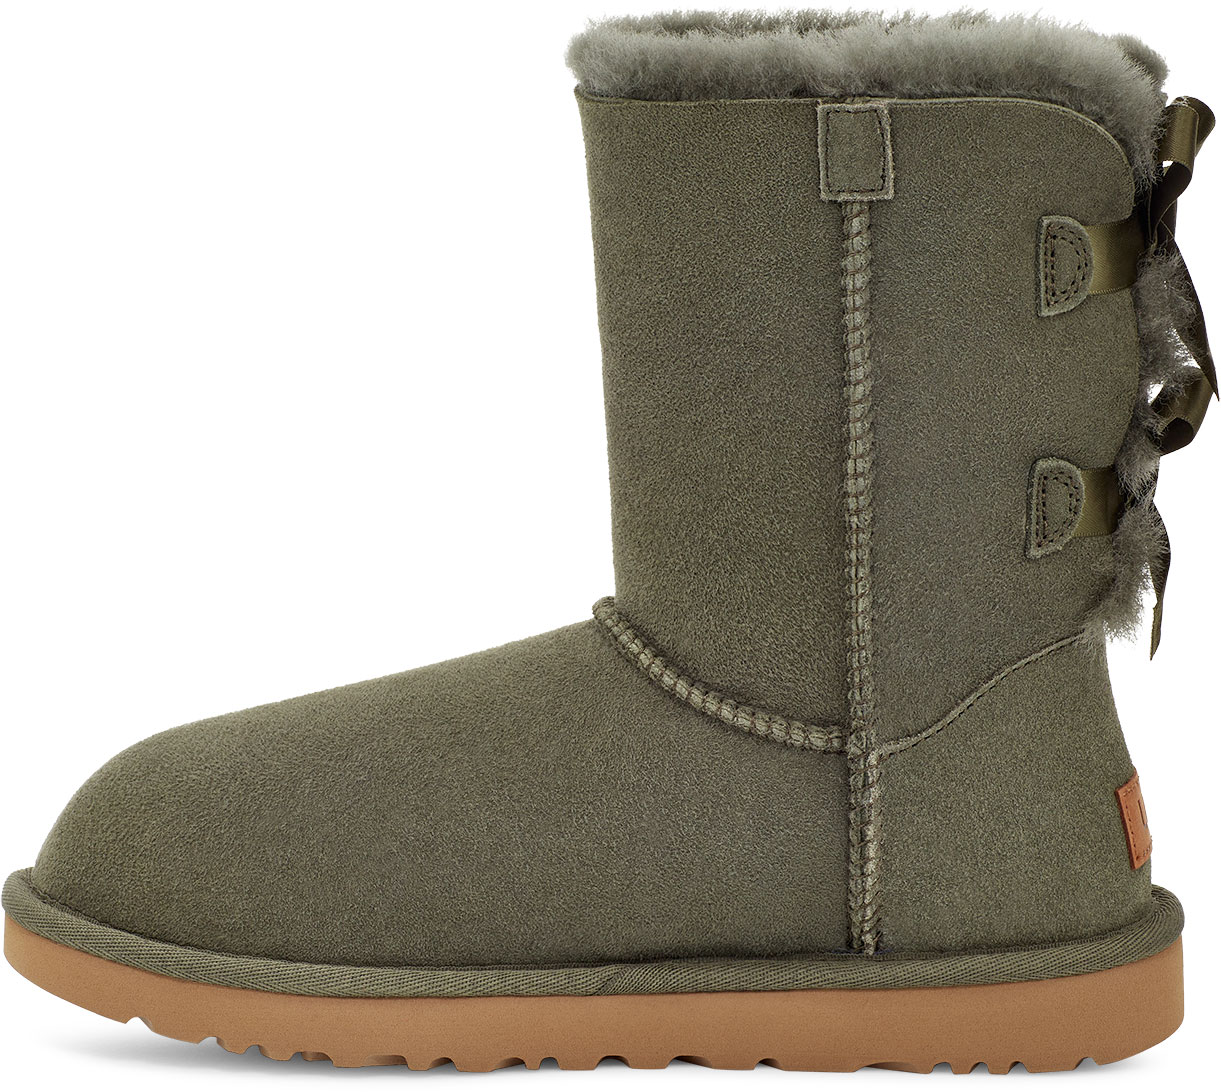 UGG Schuhe Stiefel Boots BAILEY BOW II Stiefel 2024 forest night Stiefeletten